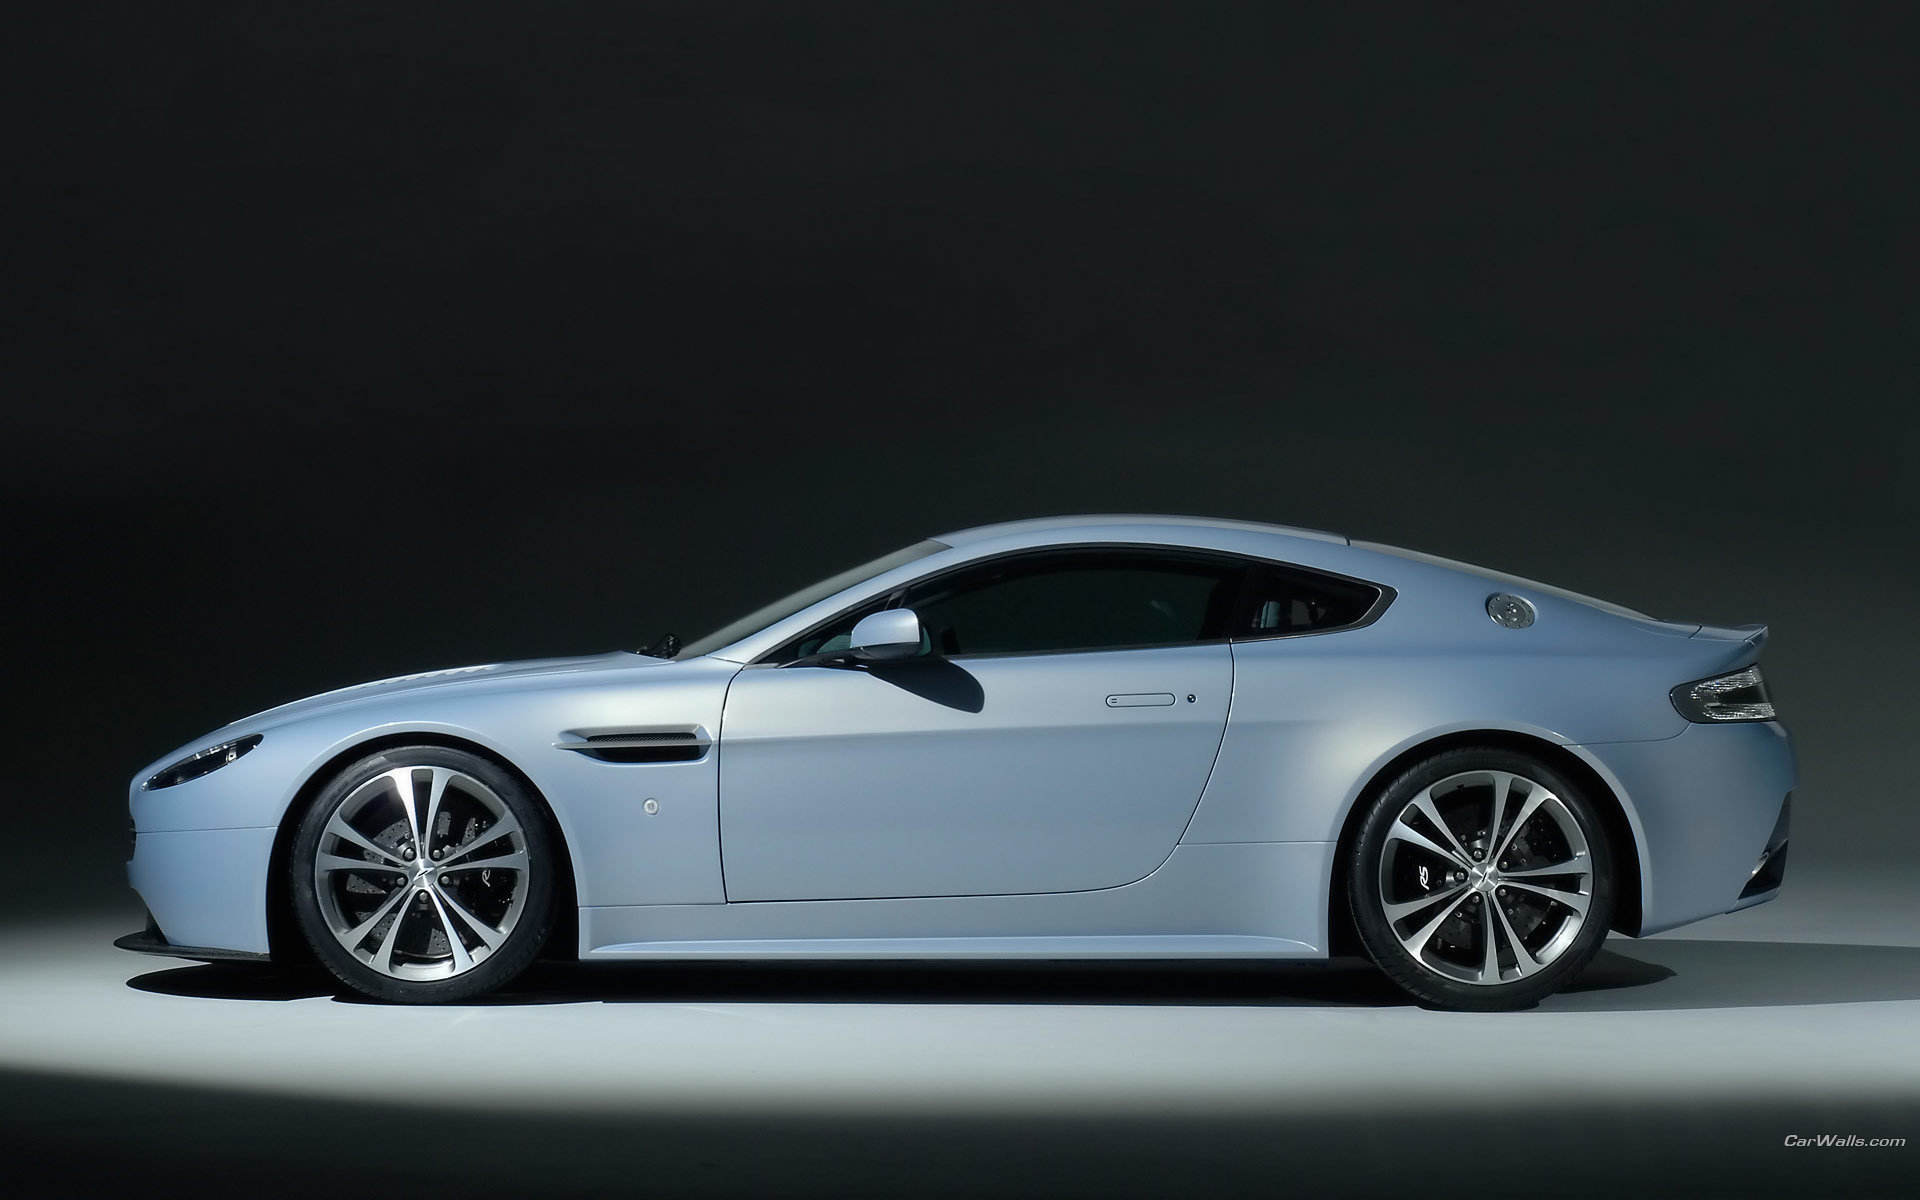 Awesome Aston Martin V12 Vantage free background ID:180172 for hd 1920x1200 desktop